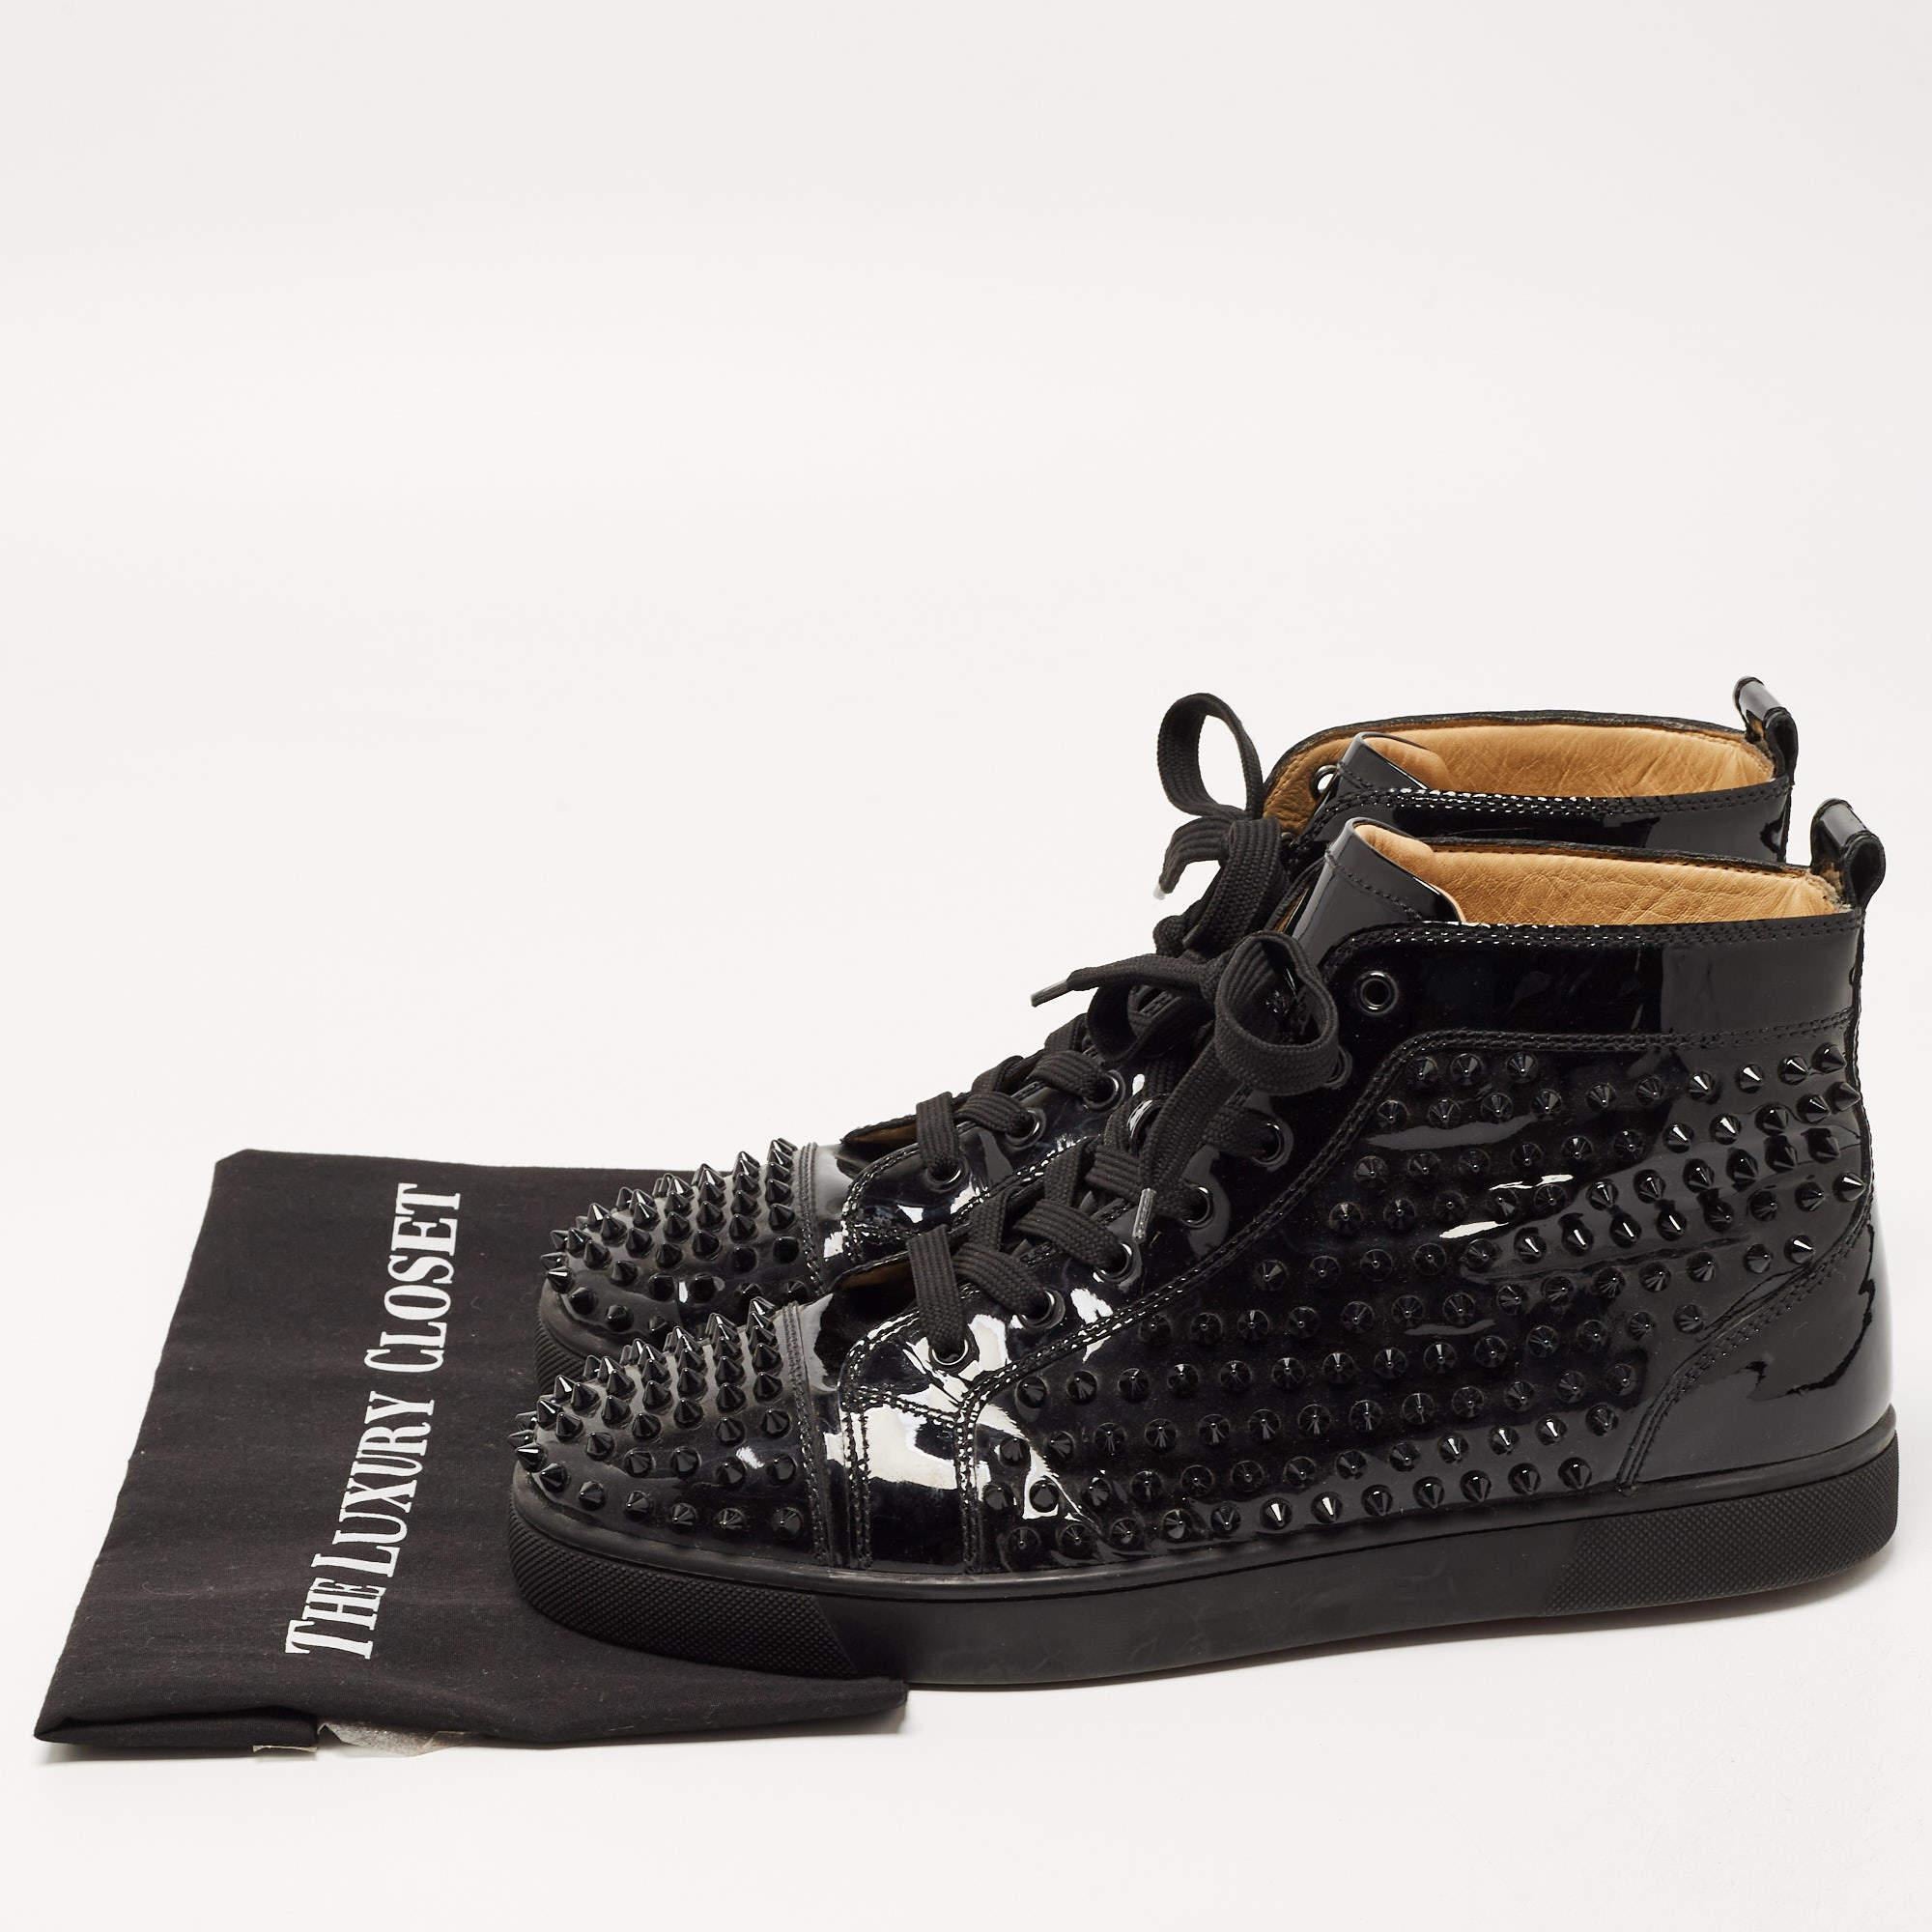 Christian Louboutin Black Patent Leather Louis Spikes High Top Sneakers Size 43. 5